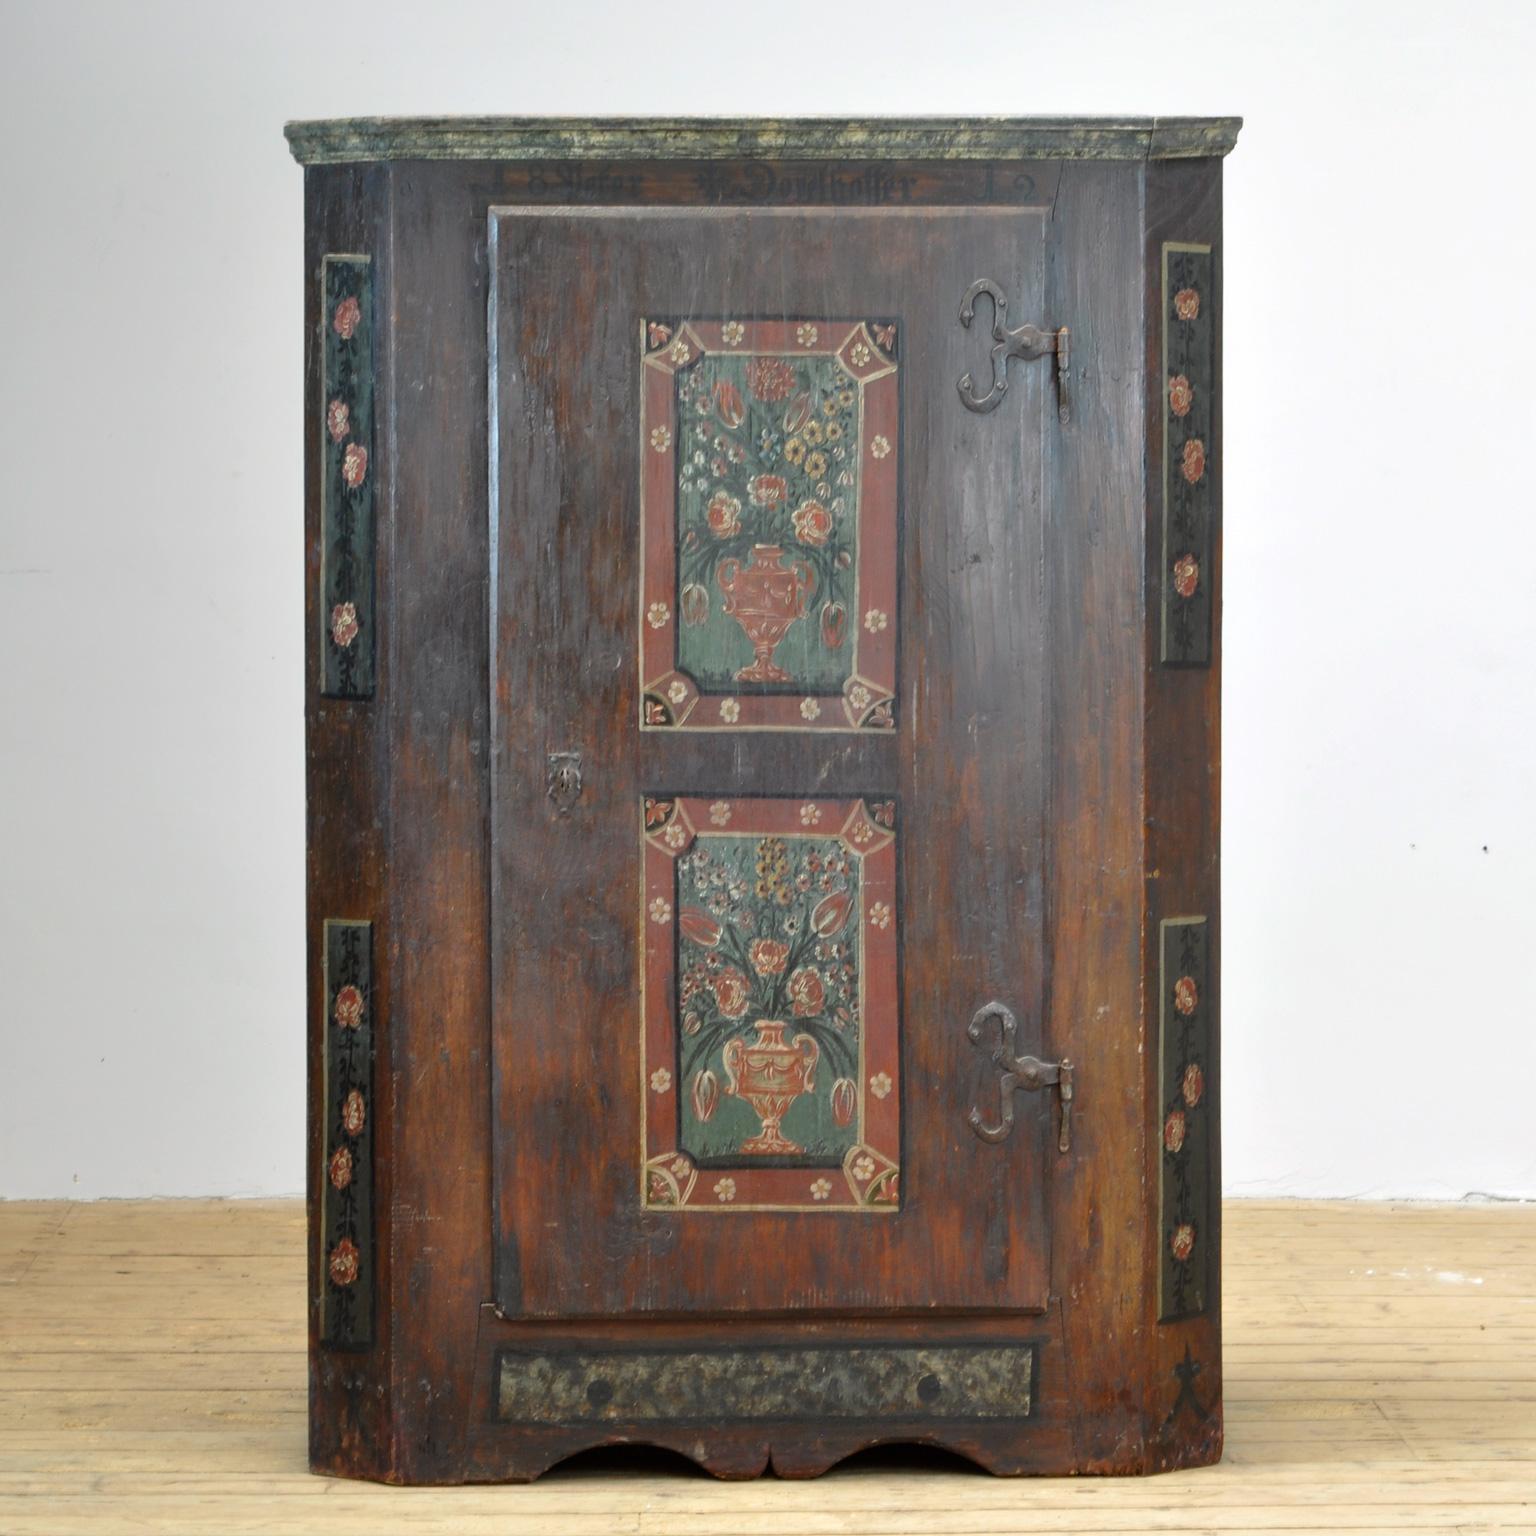 A beautiful one-door cabinet from the rural south of Germany, dating back to 1812. The cabinet was probably given as a wedding gift. On the front you can read 2 names with the year 1812. This cabinet is made of solid pine and is very elegant and